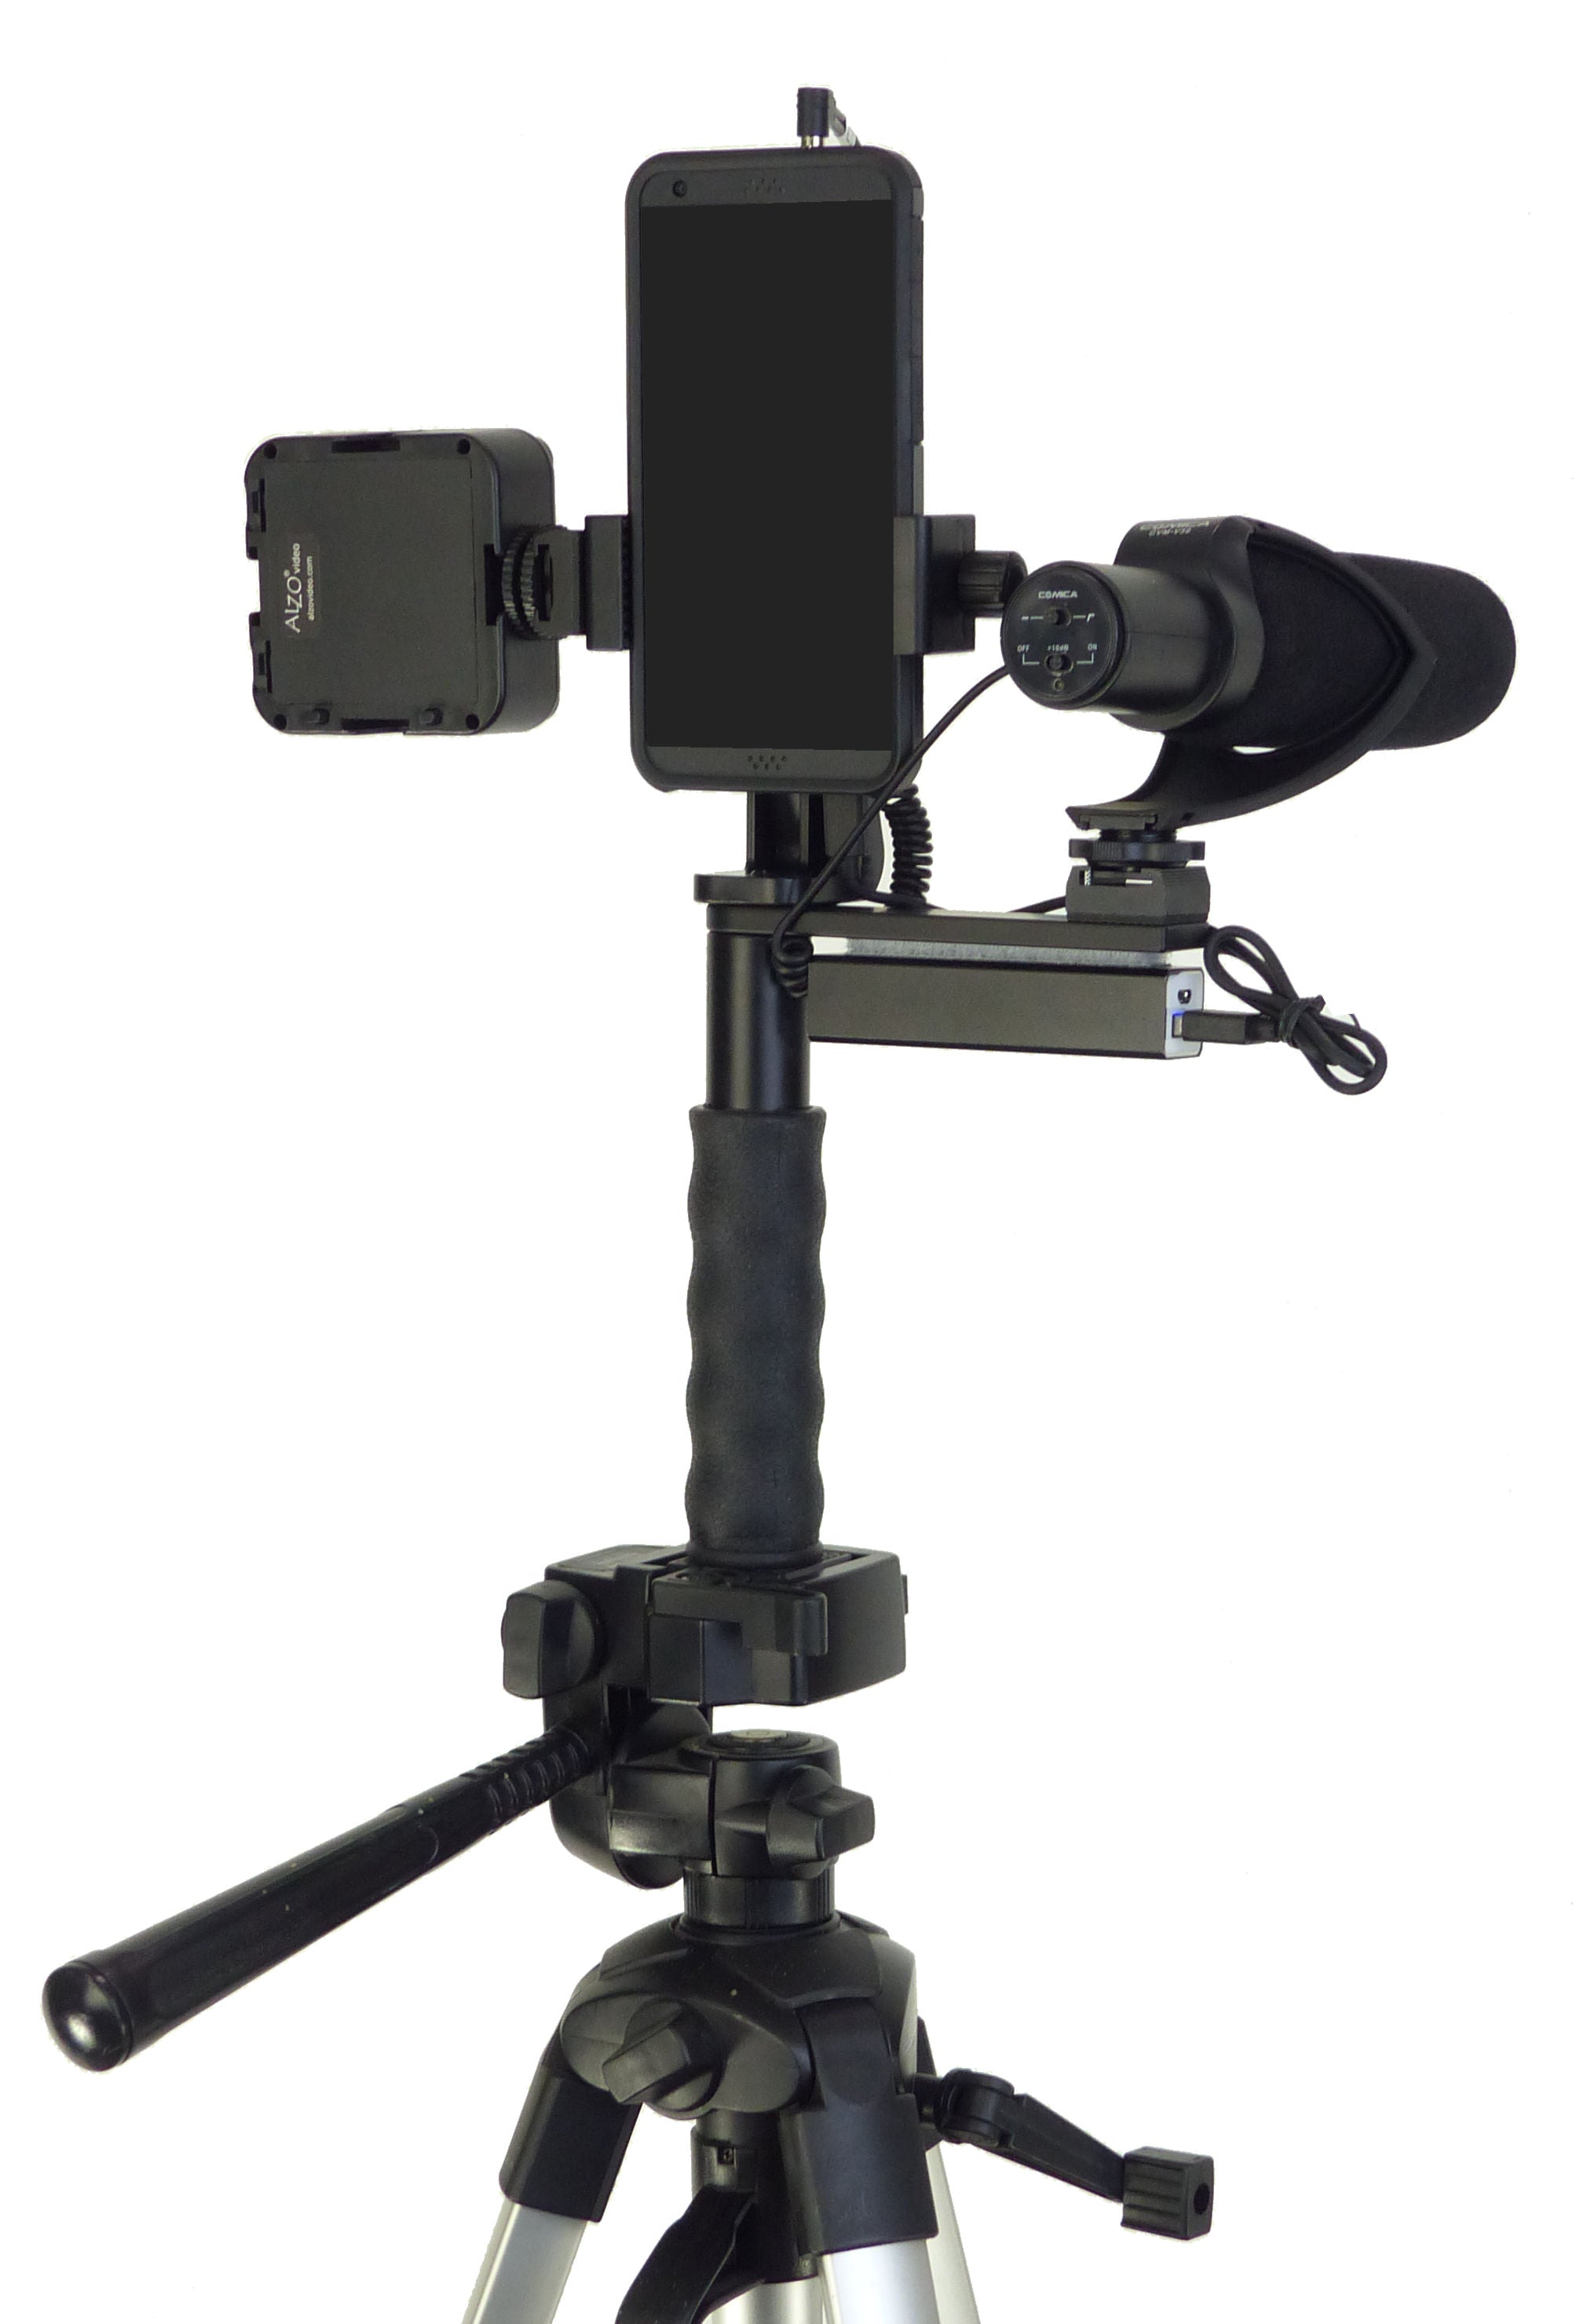 DJI Pocket 2 Microphone Mount For Cold/Hot Shoe Mics for 3.5mm Mic Adapter  Osmo